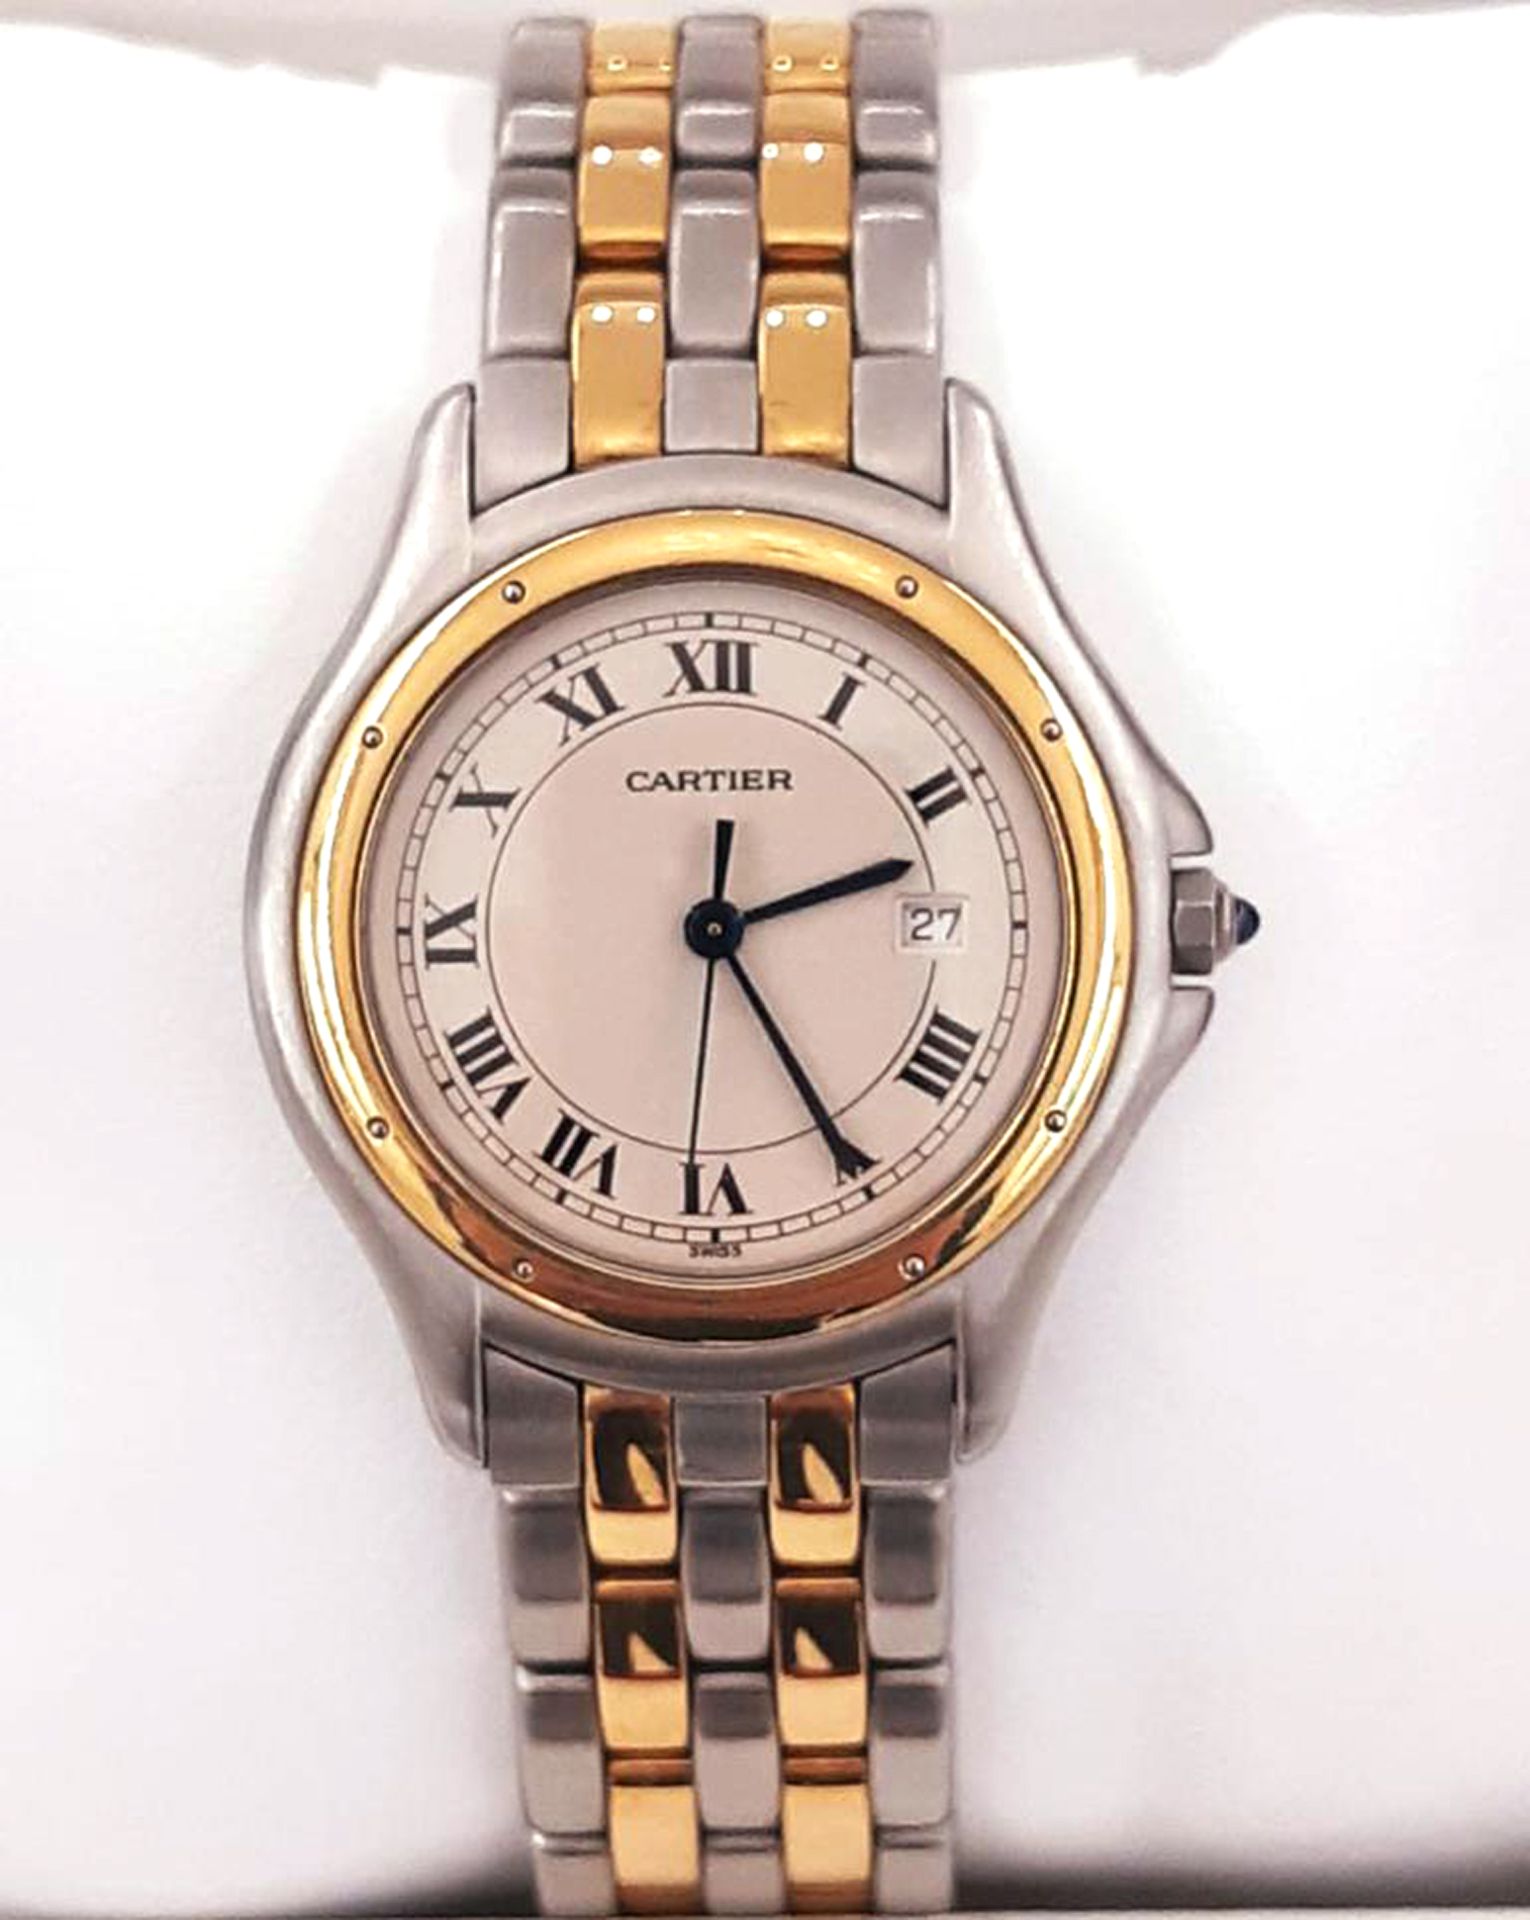 CARTIER COUGAR WATCH IN STEEL AND GOLD 33mm - Image 3 of 6